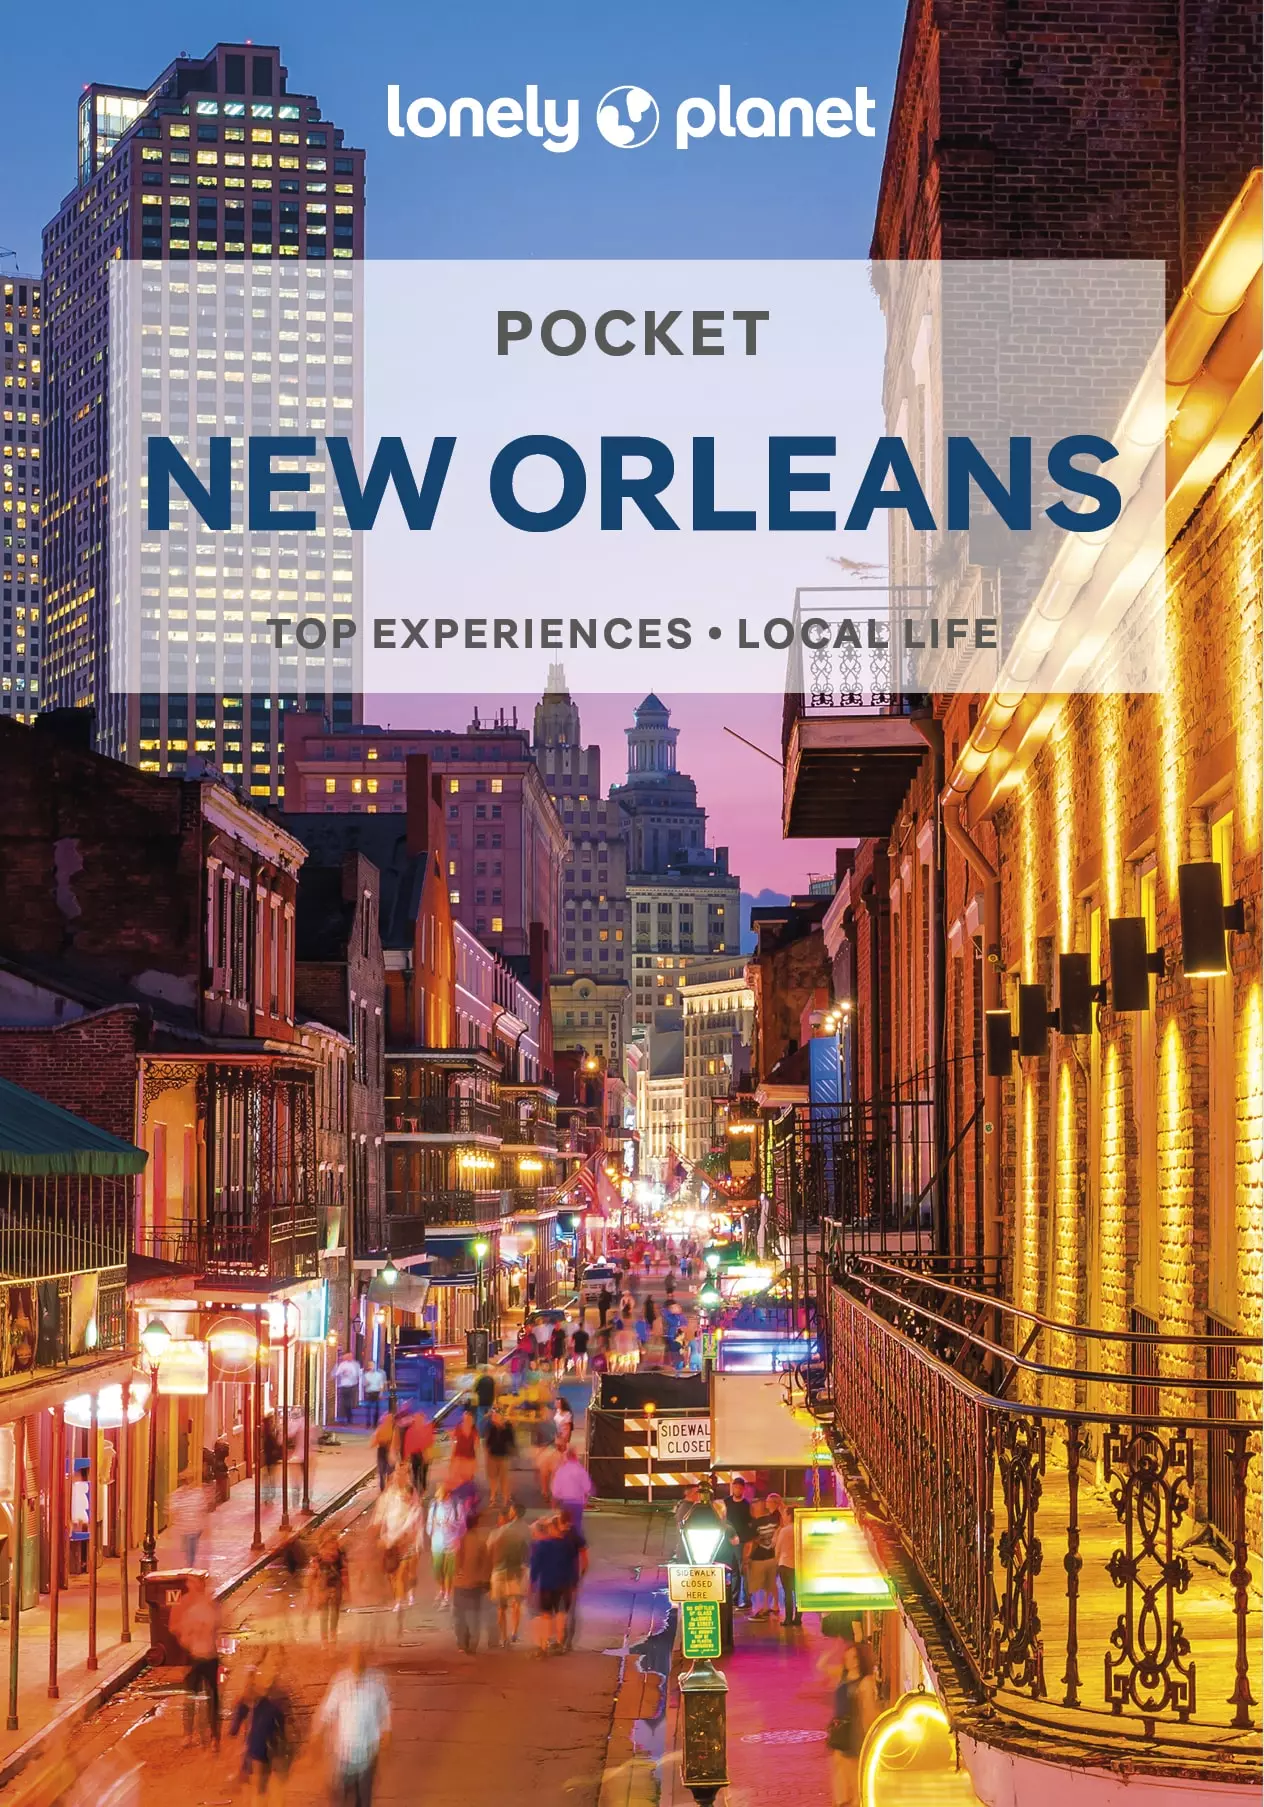 New Orleans Pocket ghid turistic Lonely Planet (engleză)